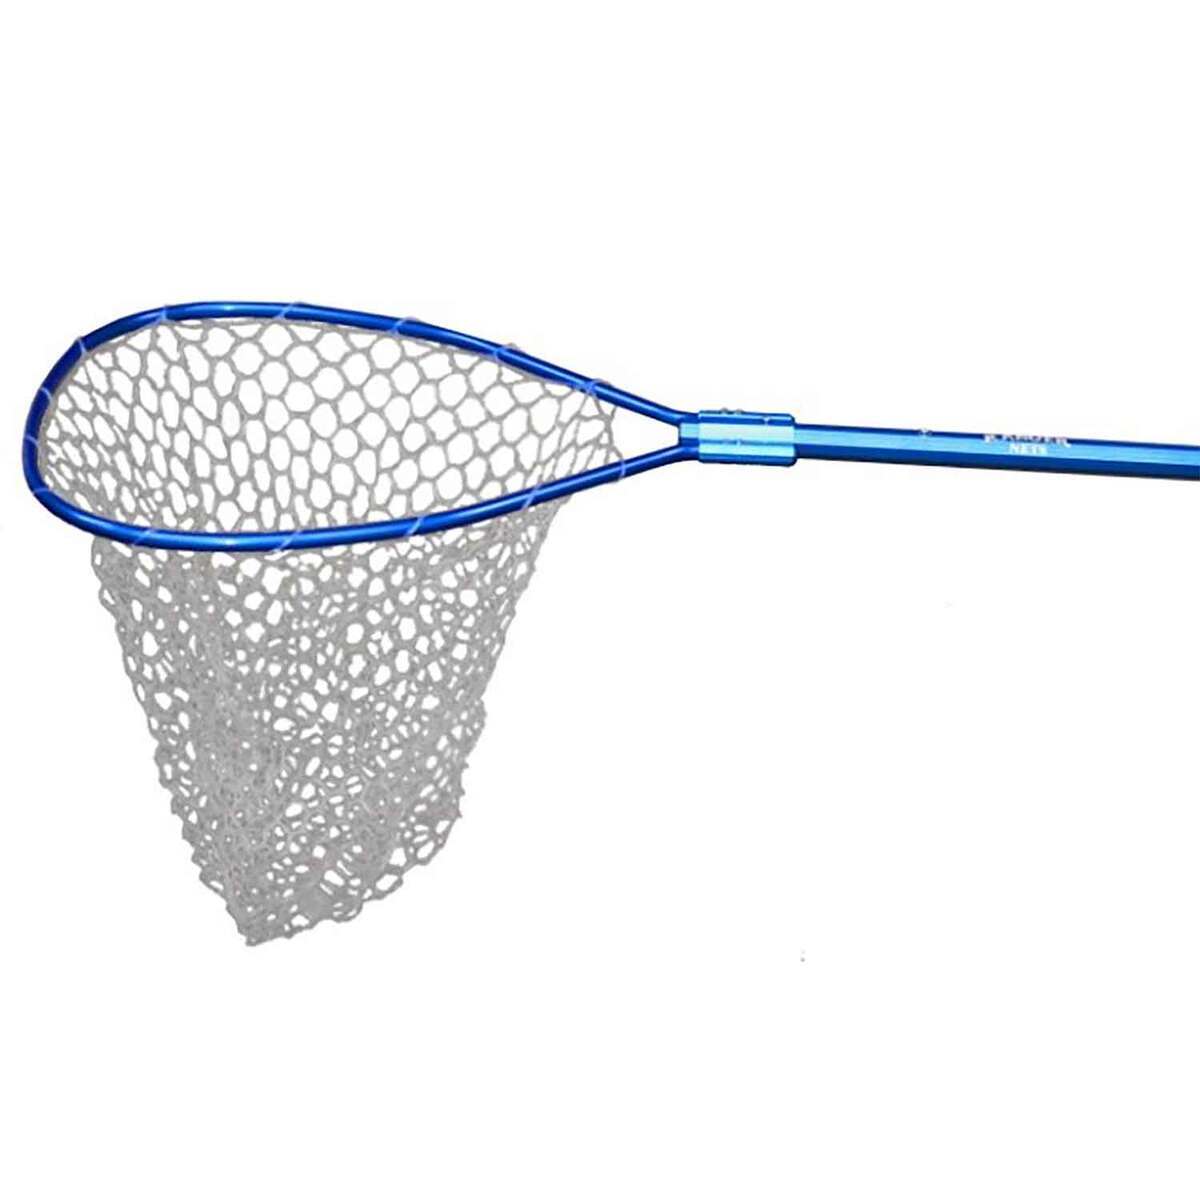 Replacement Collapsible Fishing Nets Rubber Landing Dip Net Mesh